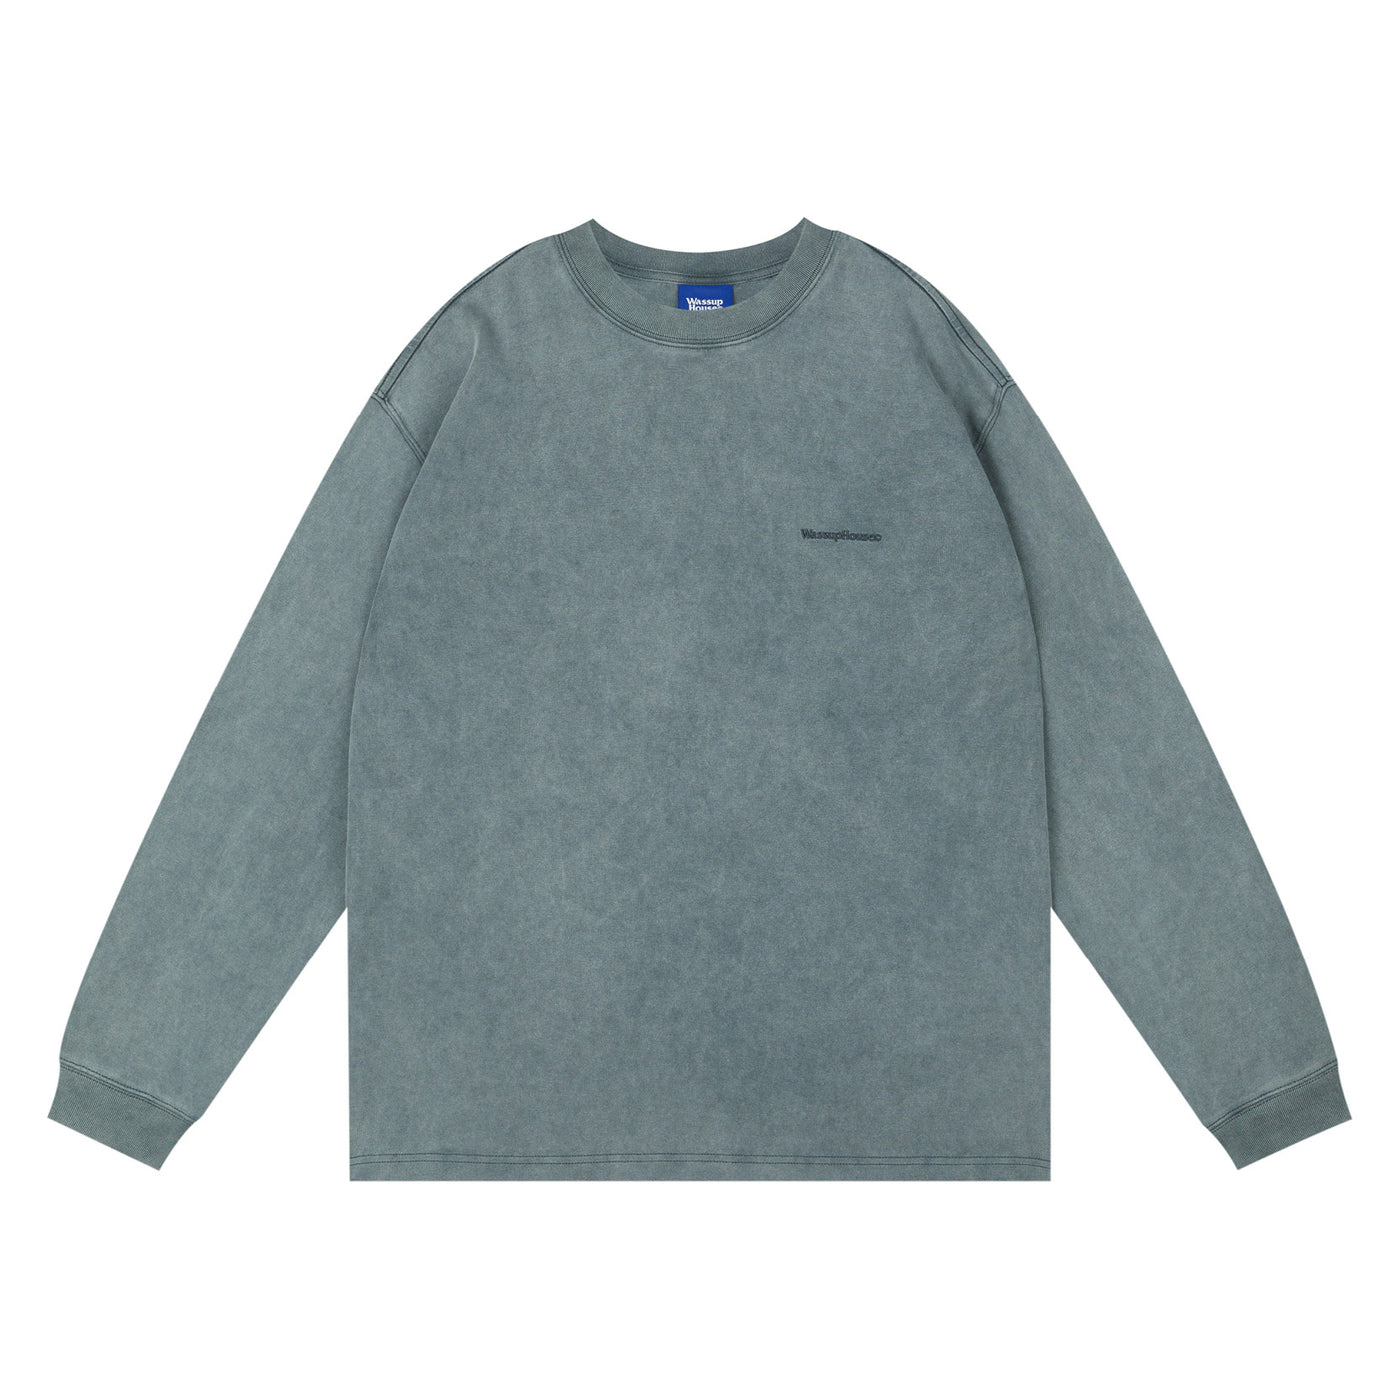 Wassup House Washed Faded Logo Long Sleeved Tee